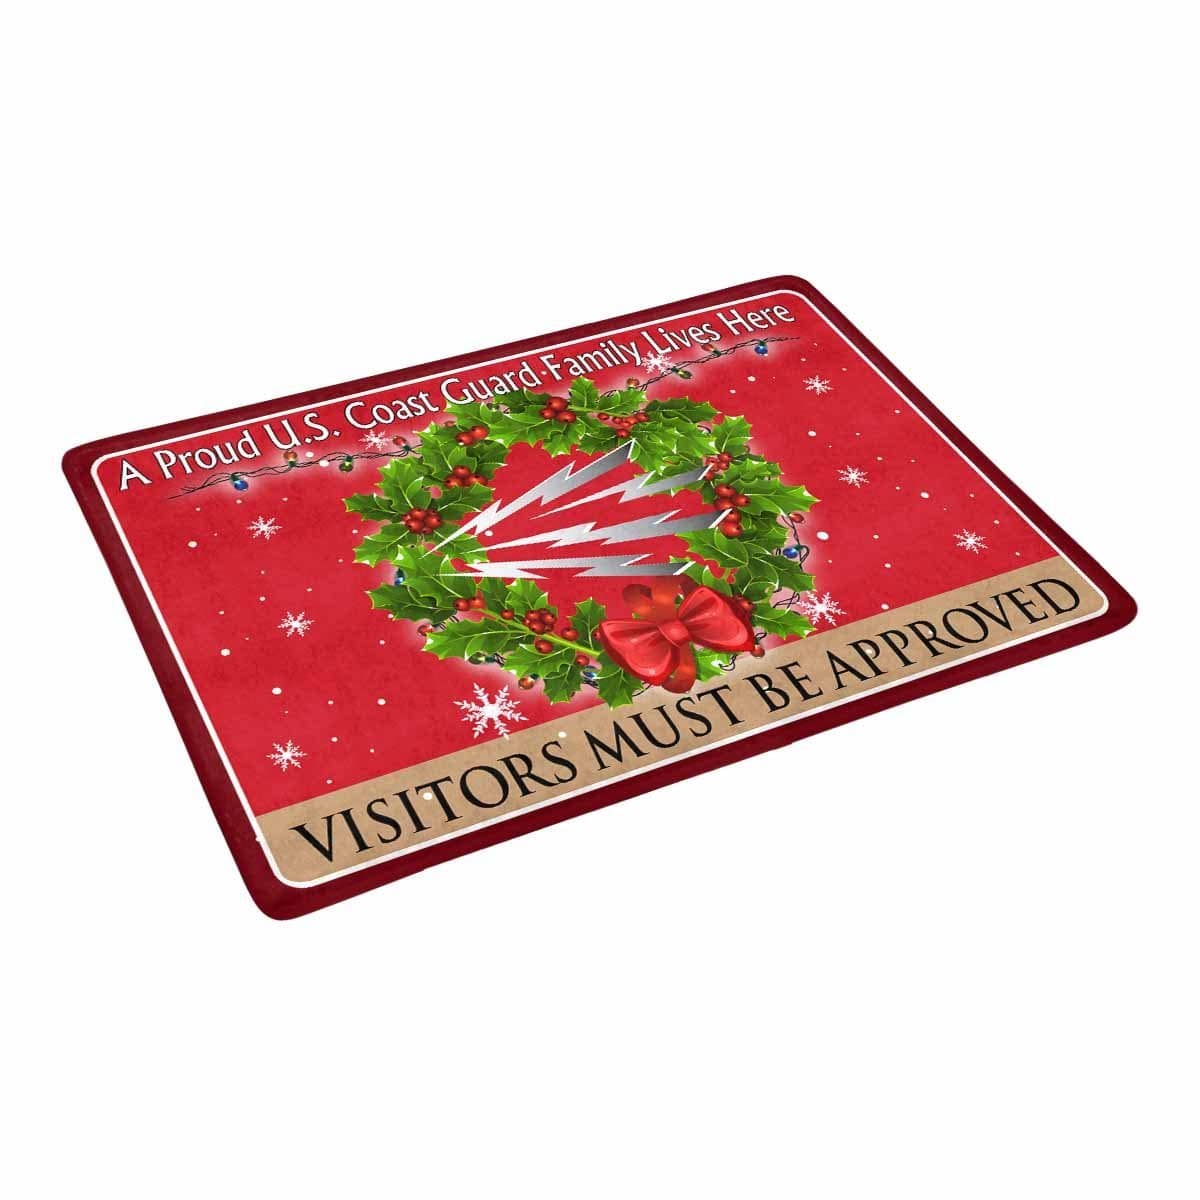 US Coast Guard Telecommunications Specialist TC Logo - Visitors must be approved Christmas Doormat-Doormat-USCG-Rate-Veterans Nation